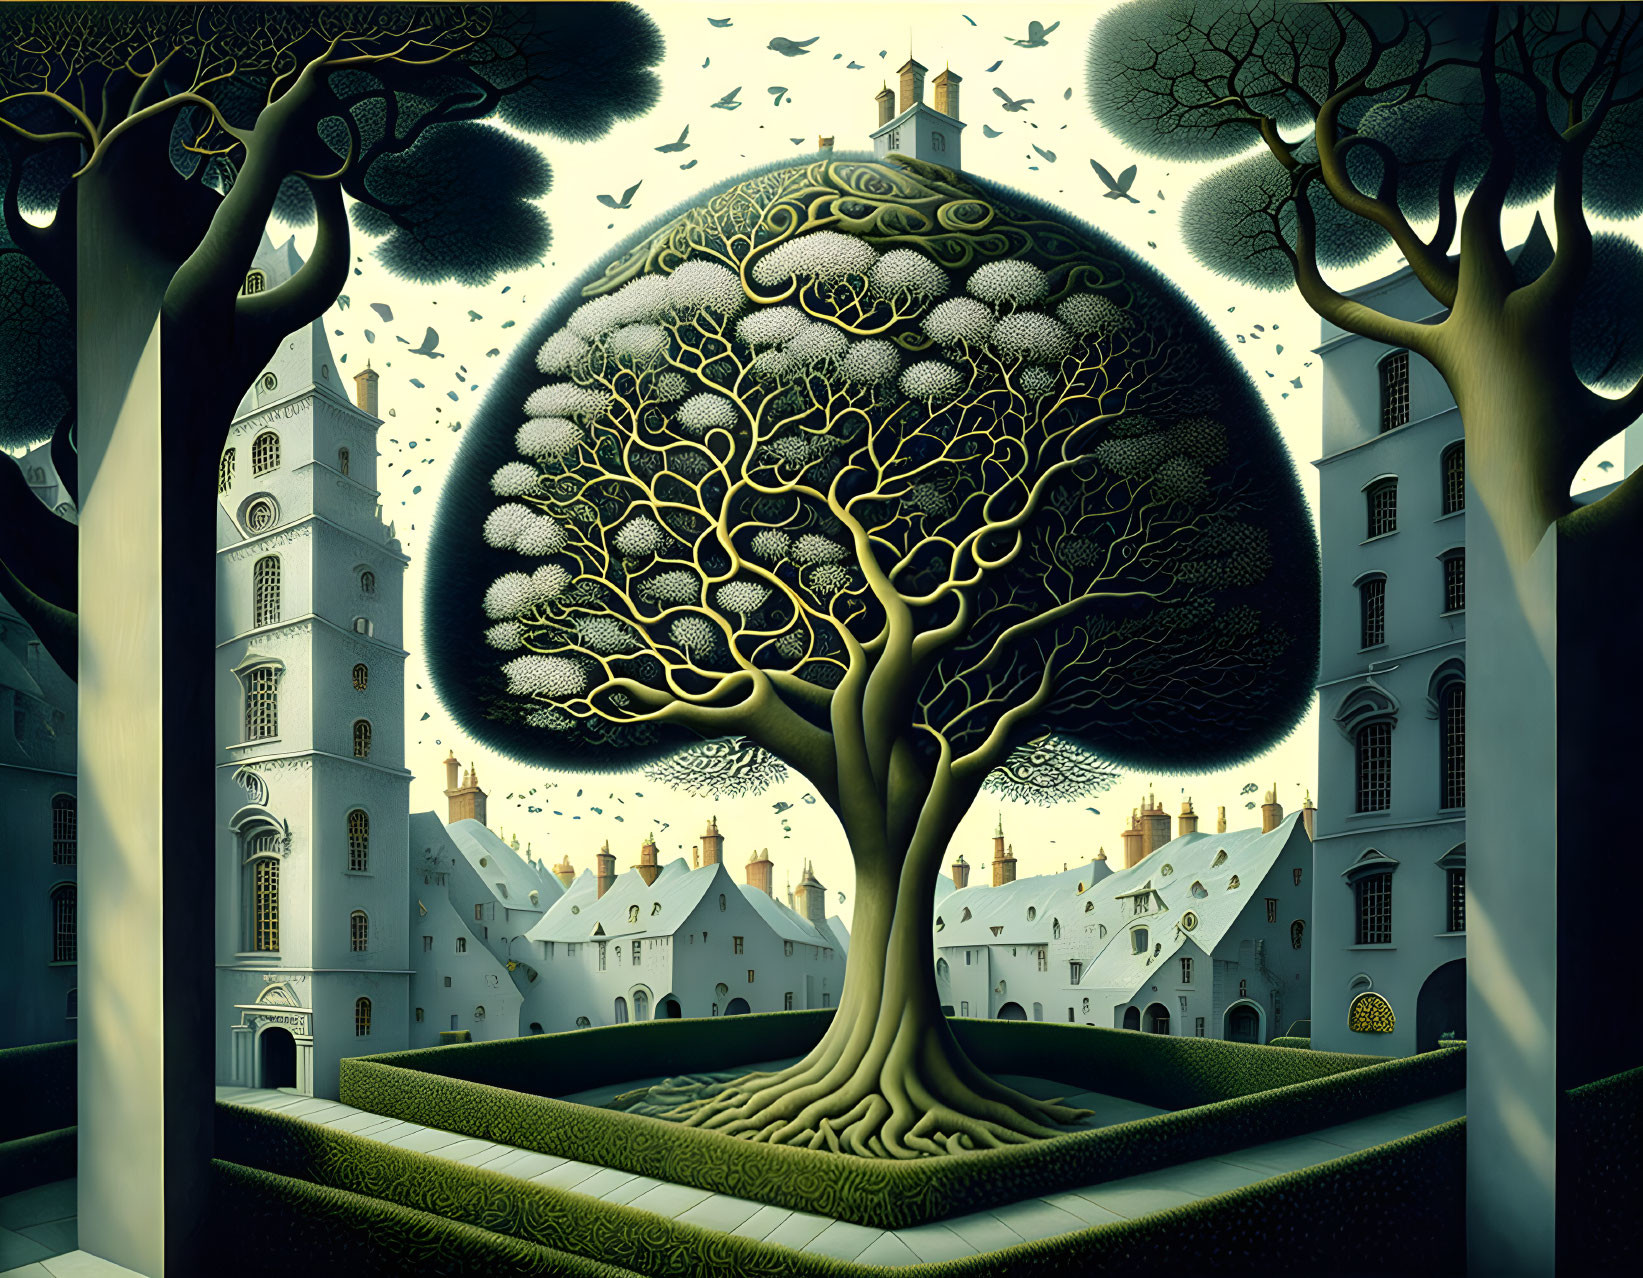 The Tree at the Heart of the Dream City